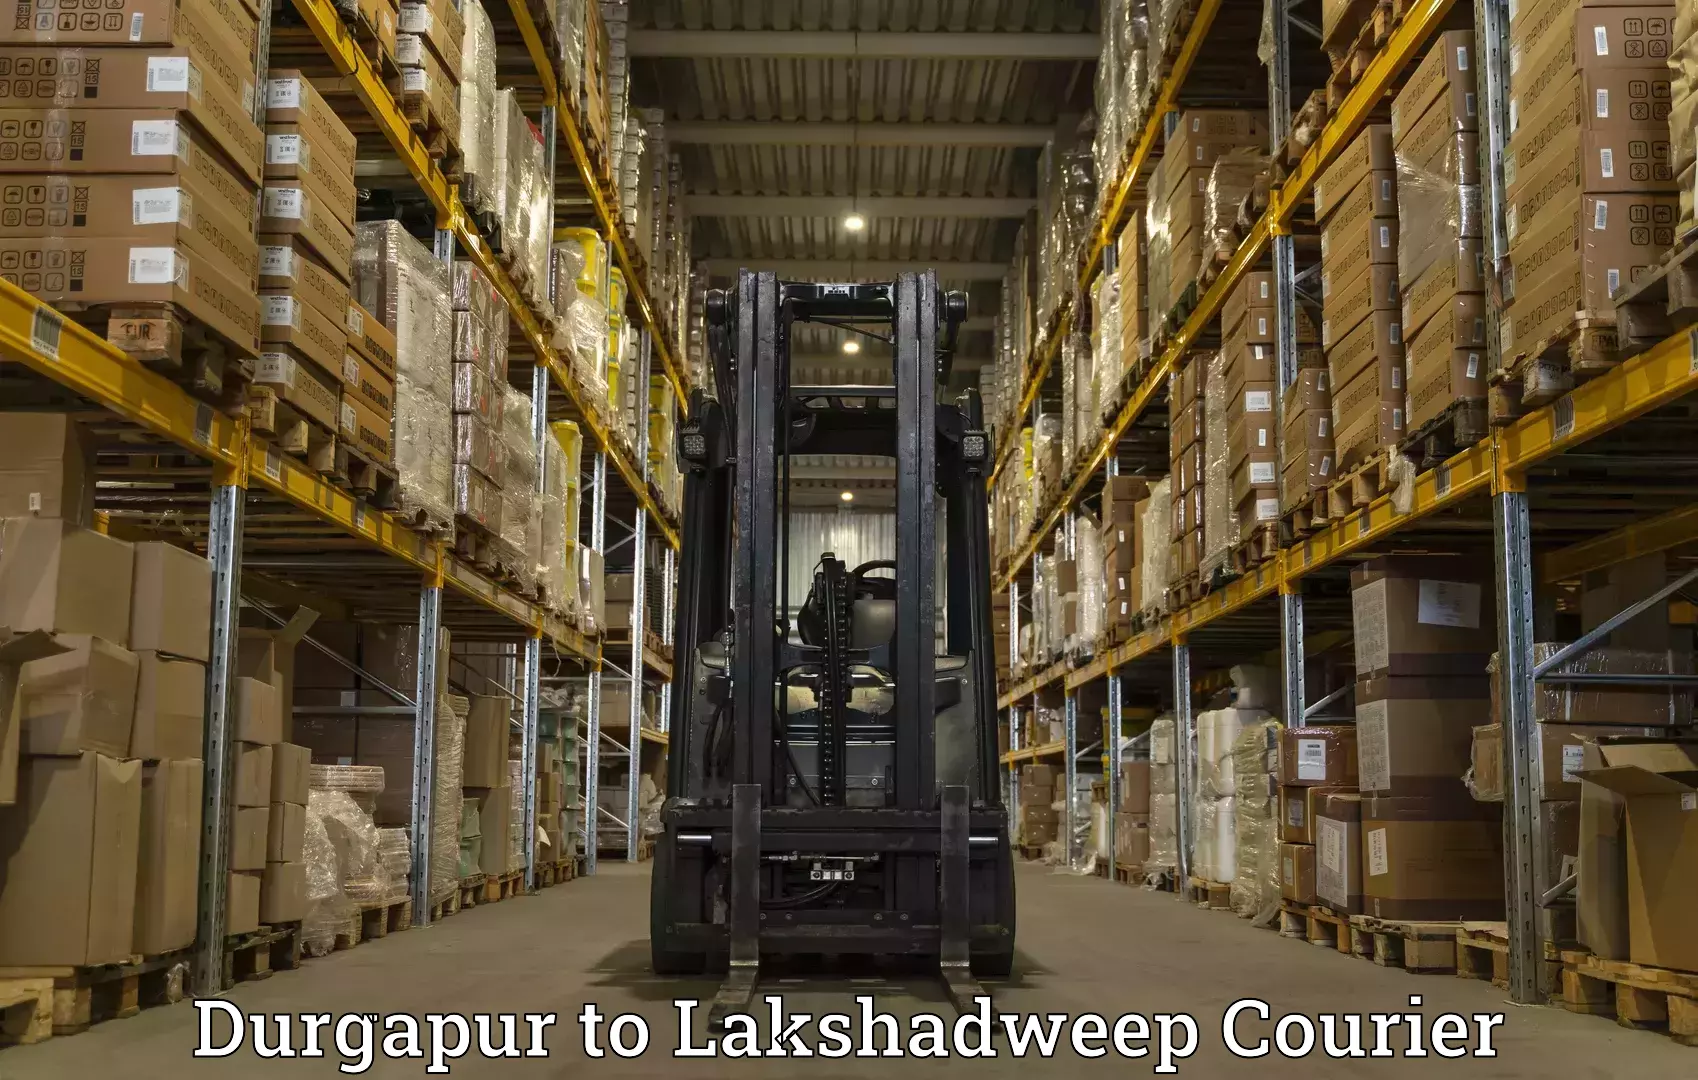 Local delivery service Durgapur to Lakshadweep